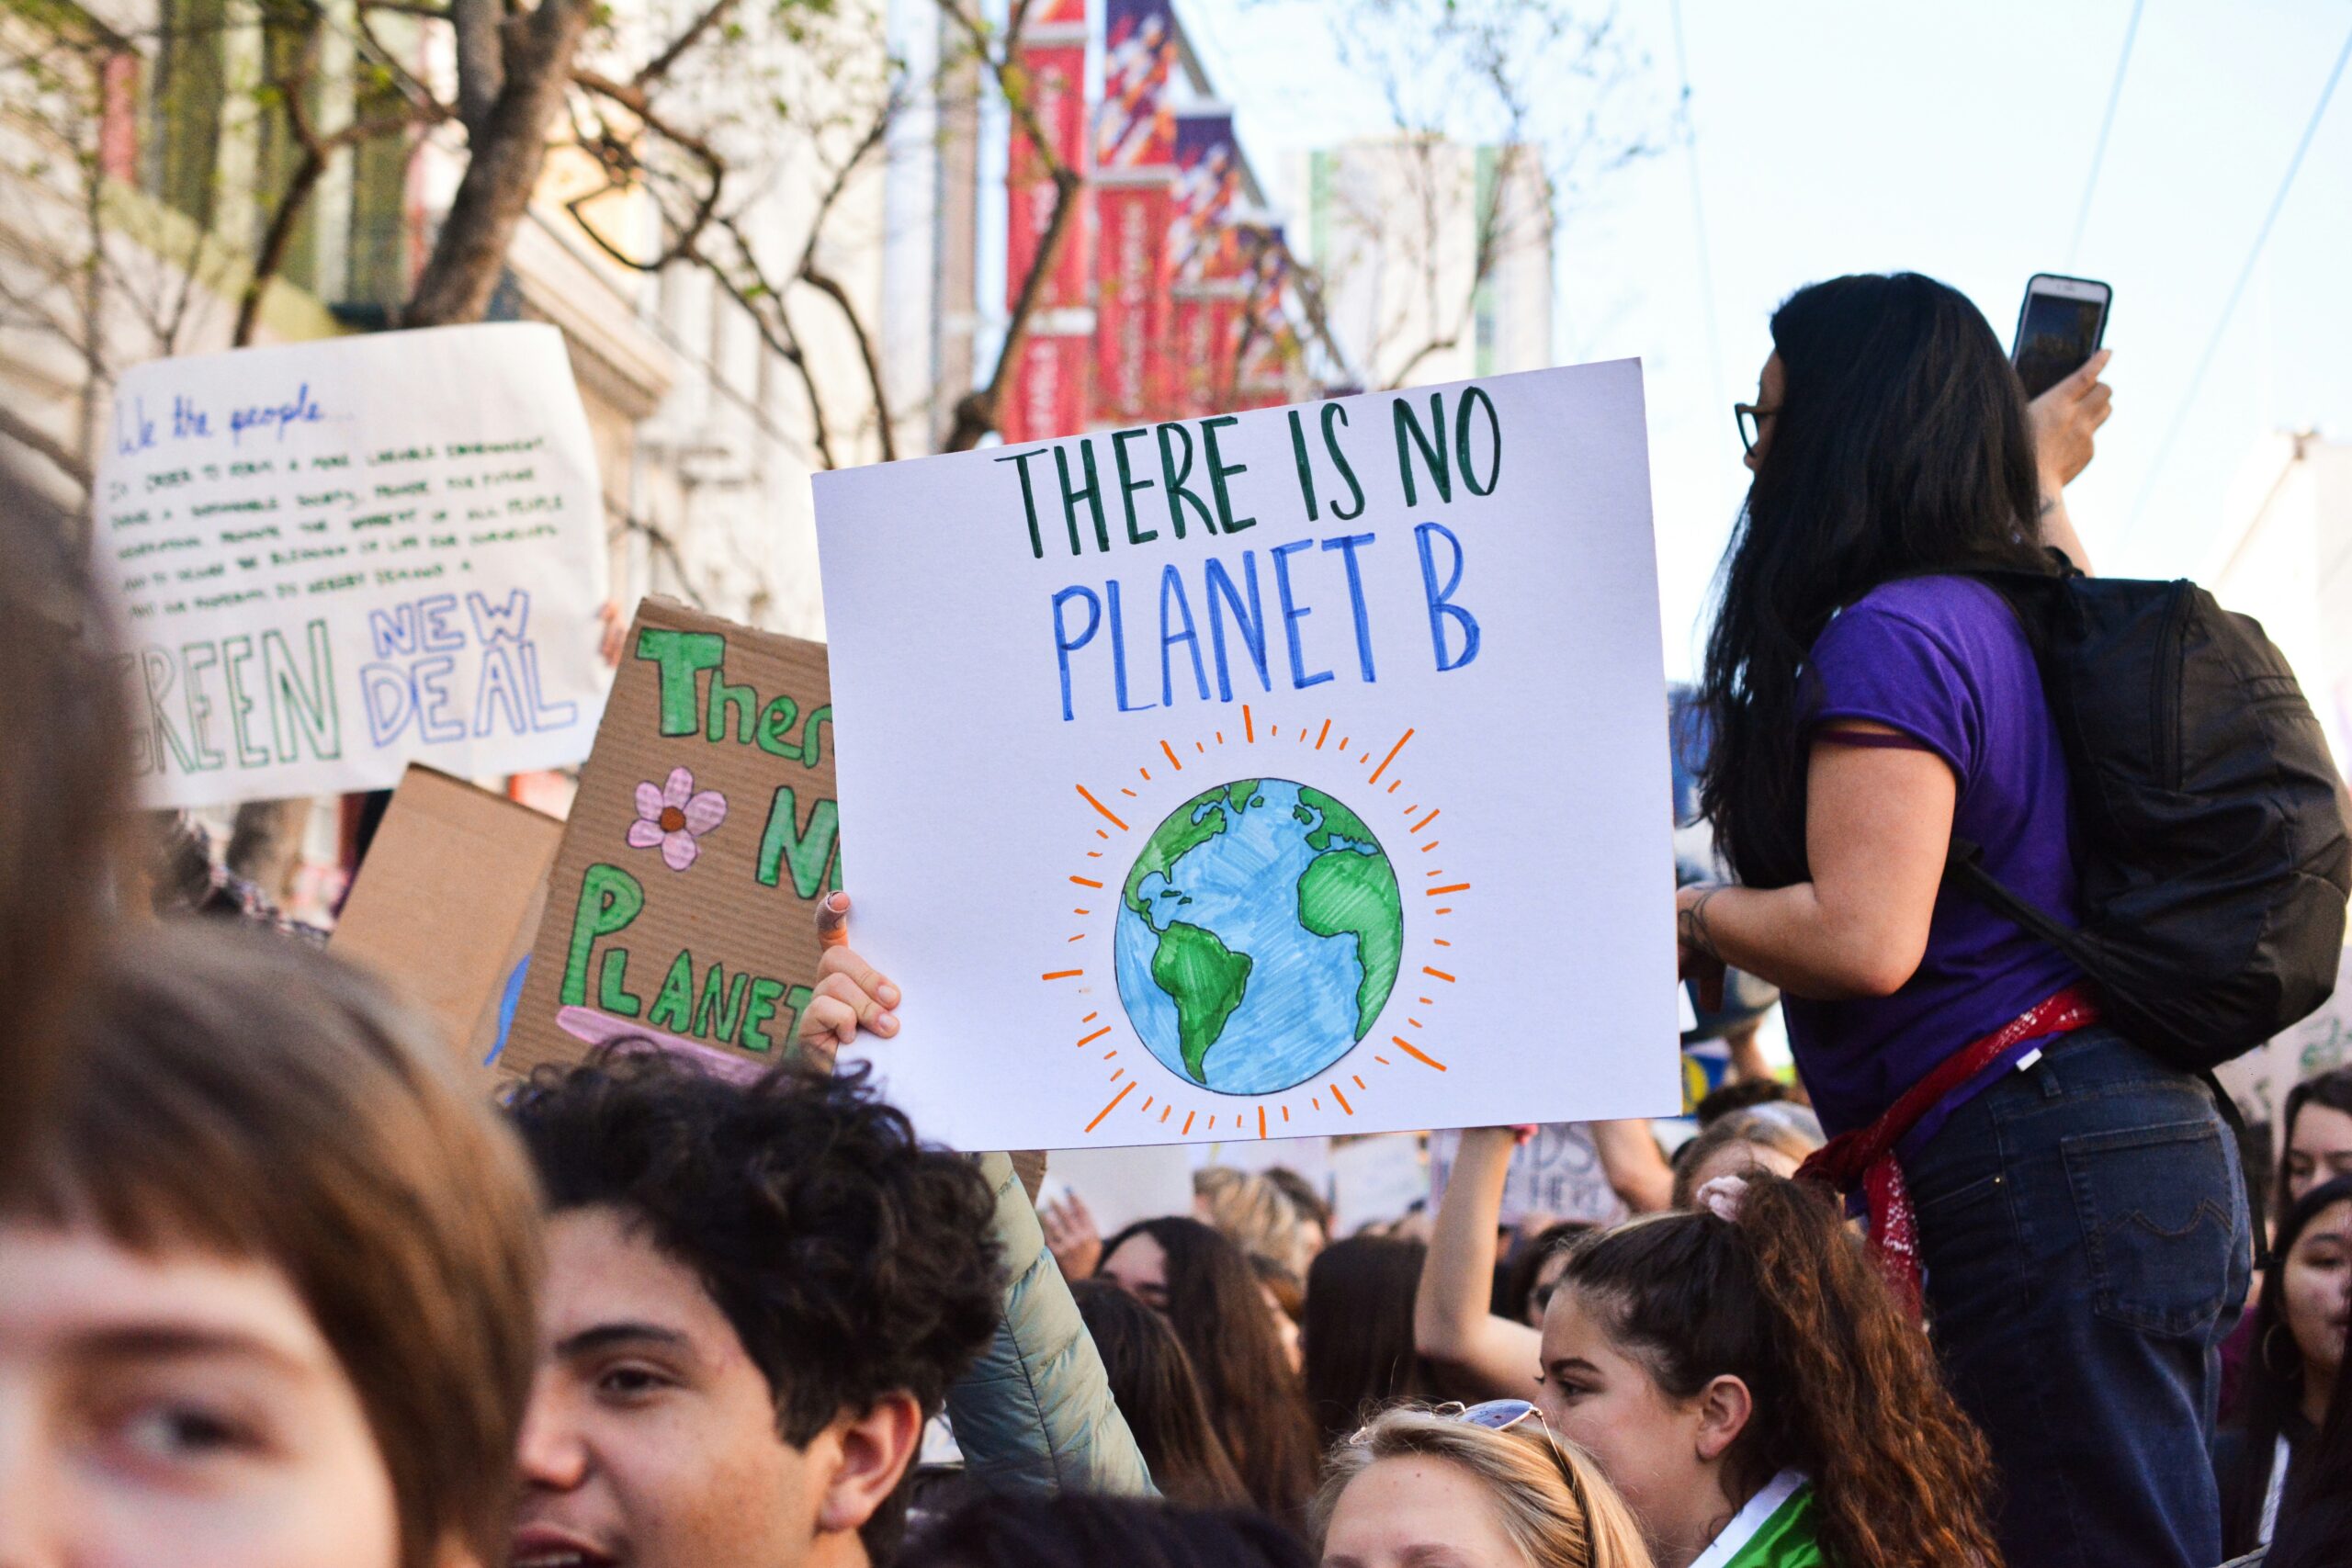 Person with a sign having there is no planet b